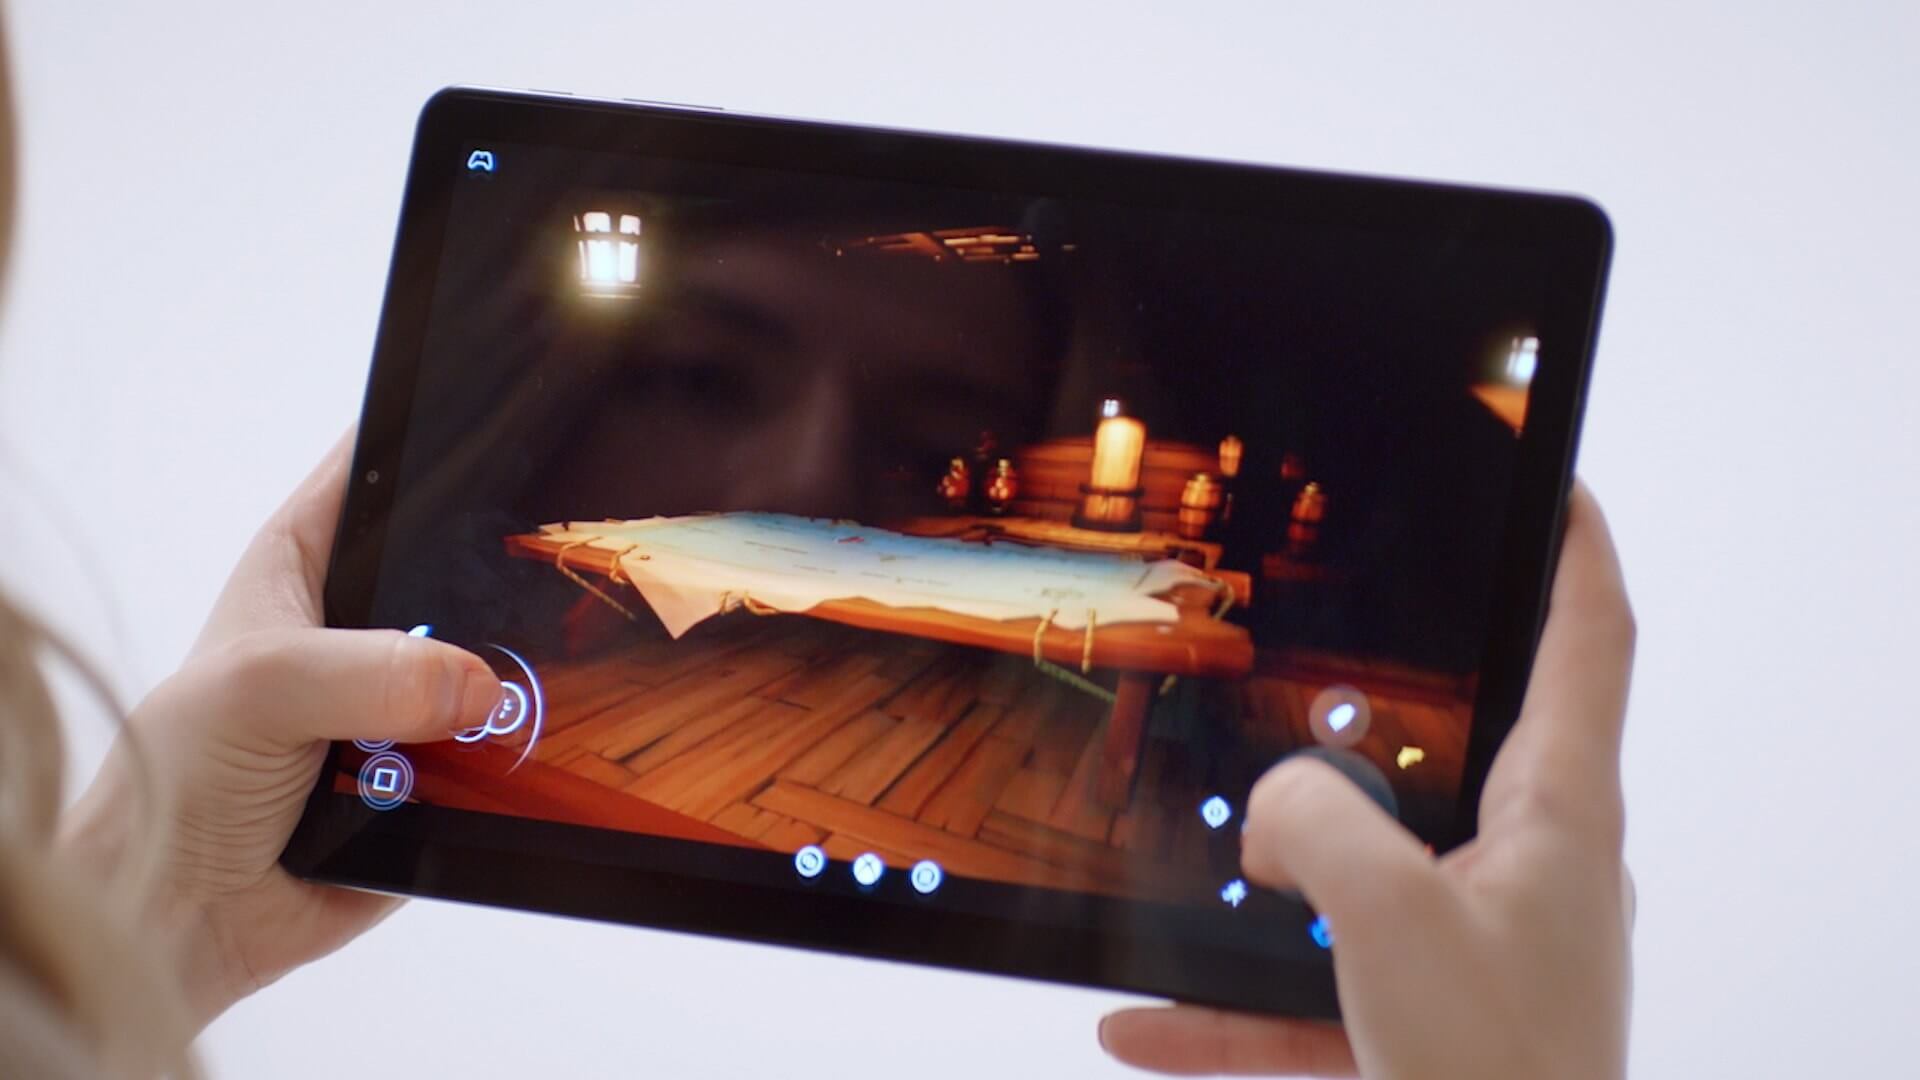 Microsoft reveals its Project xCloud game streaming service